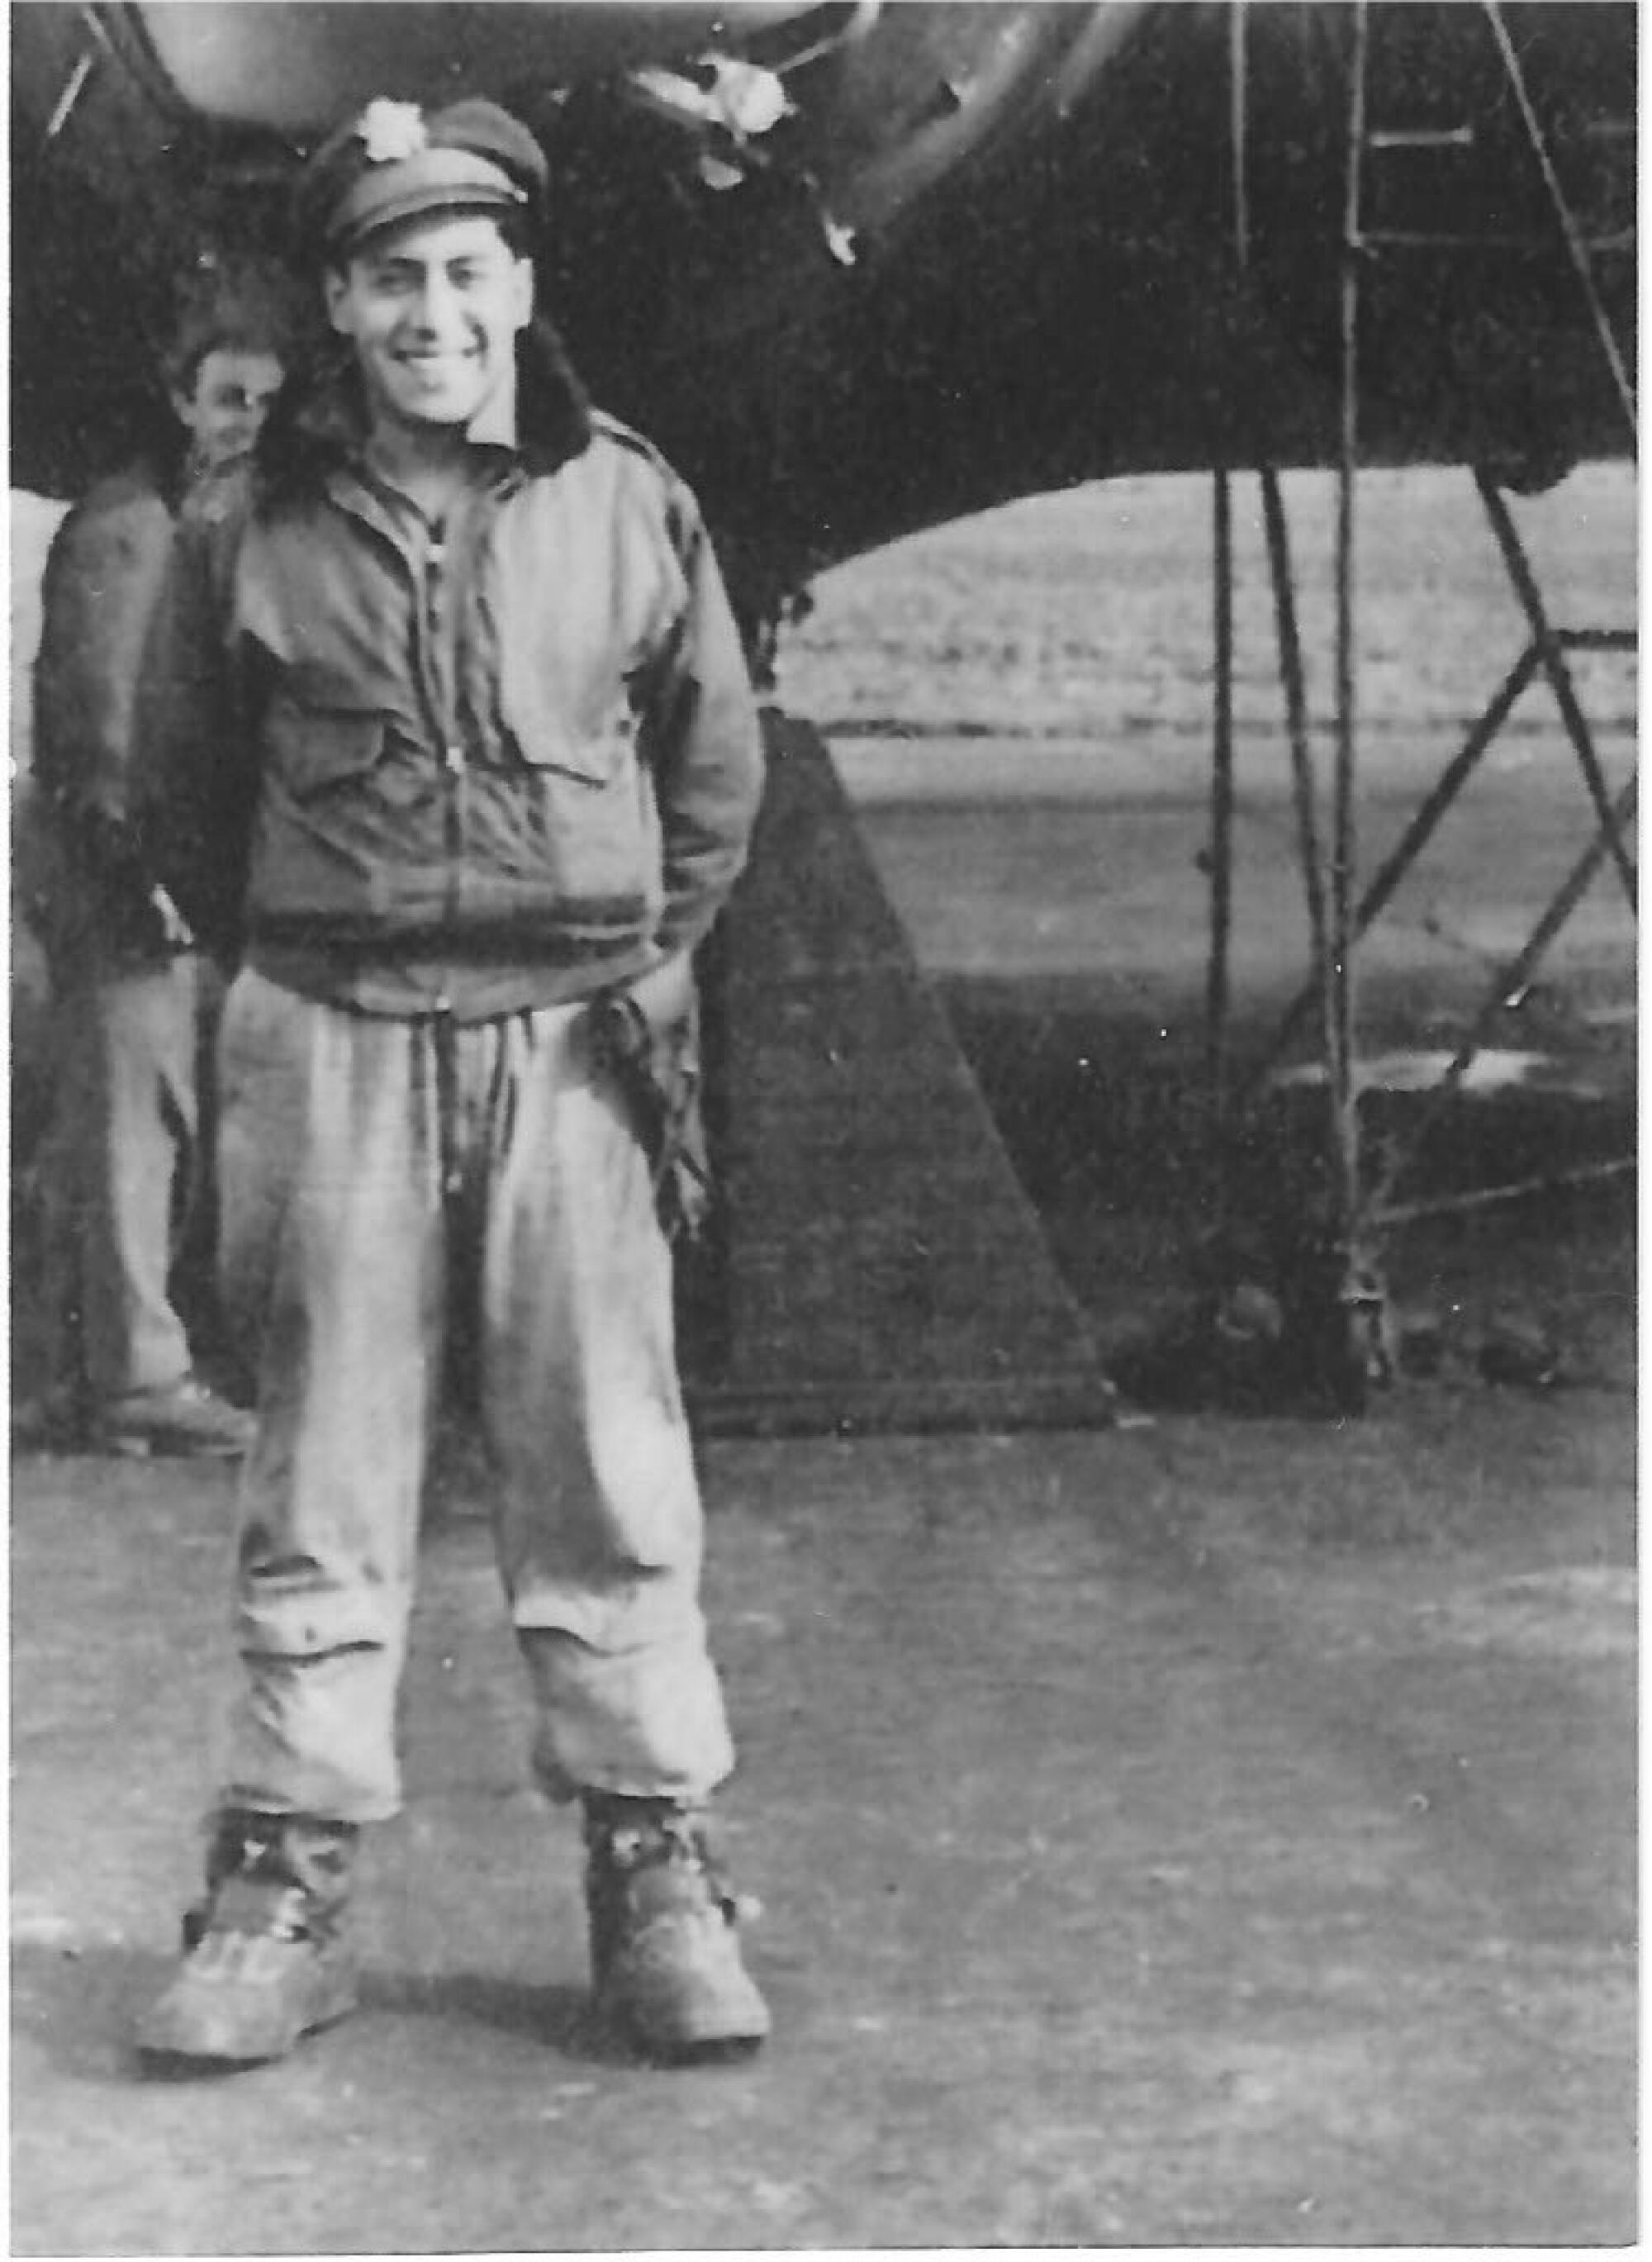 A smiling man in a military pilot's cap and uniform stands near a plane 